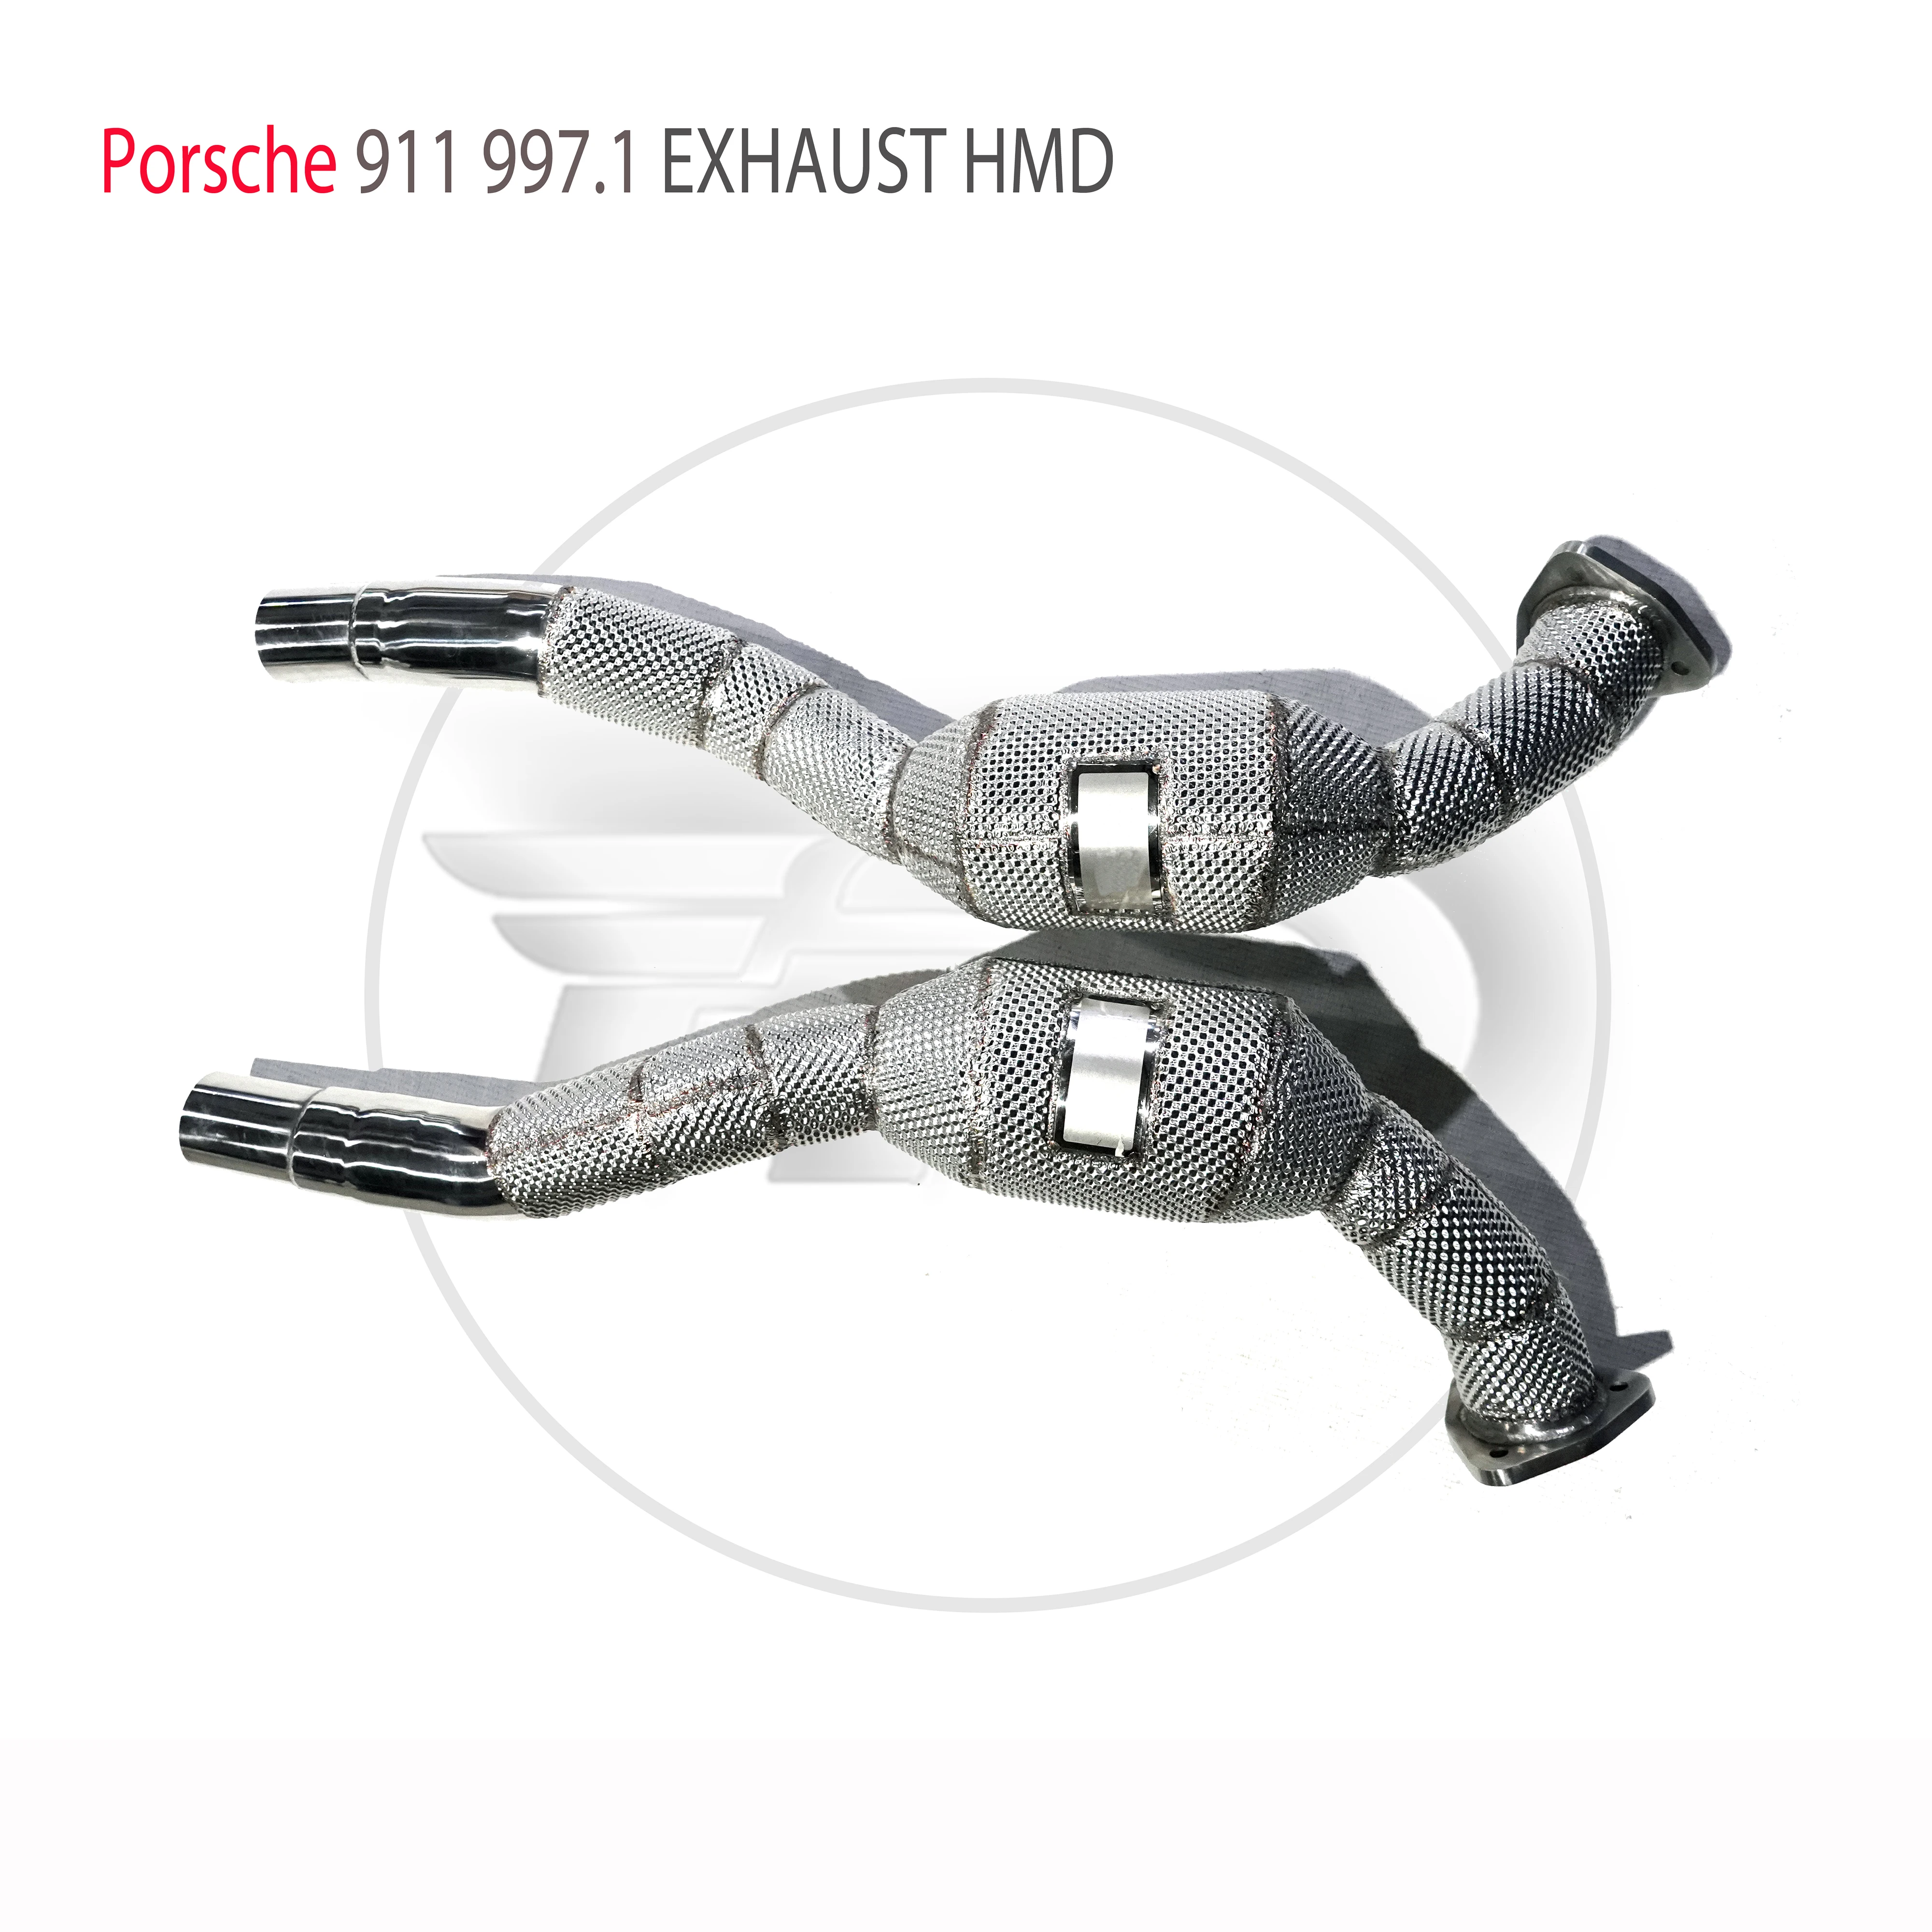 

HMD Exhaust Manifold Downpipe for Porsche 911 997.1 Car Accessories With Catalytic Converter Header Without Cat Pipe